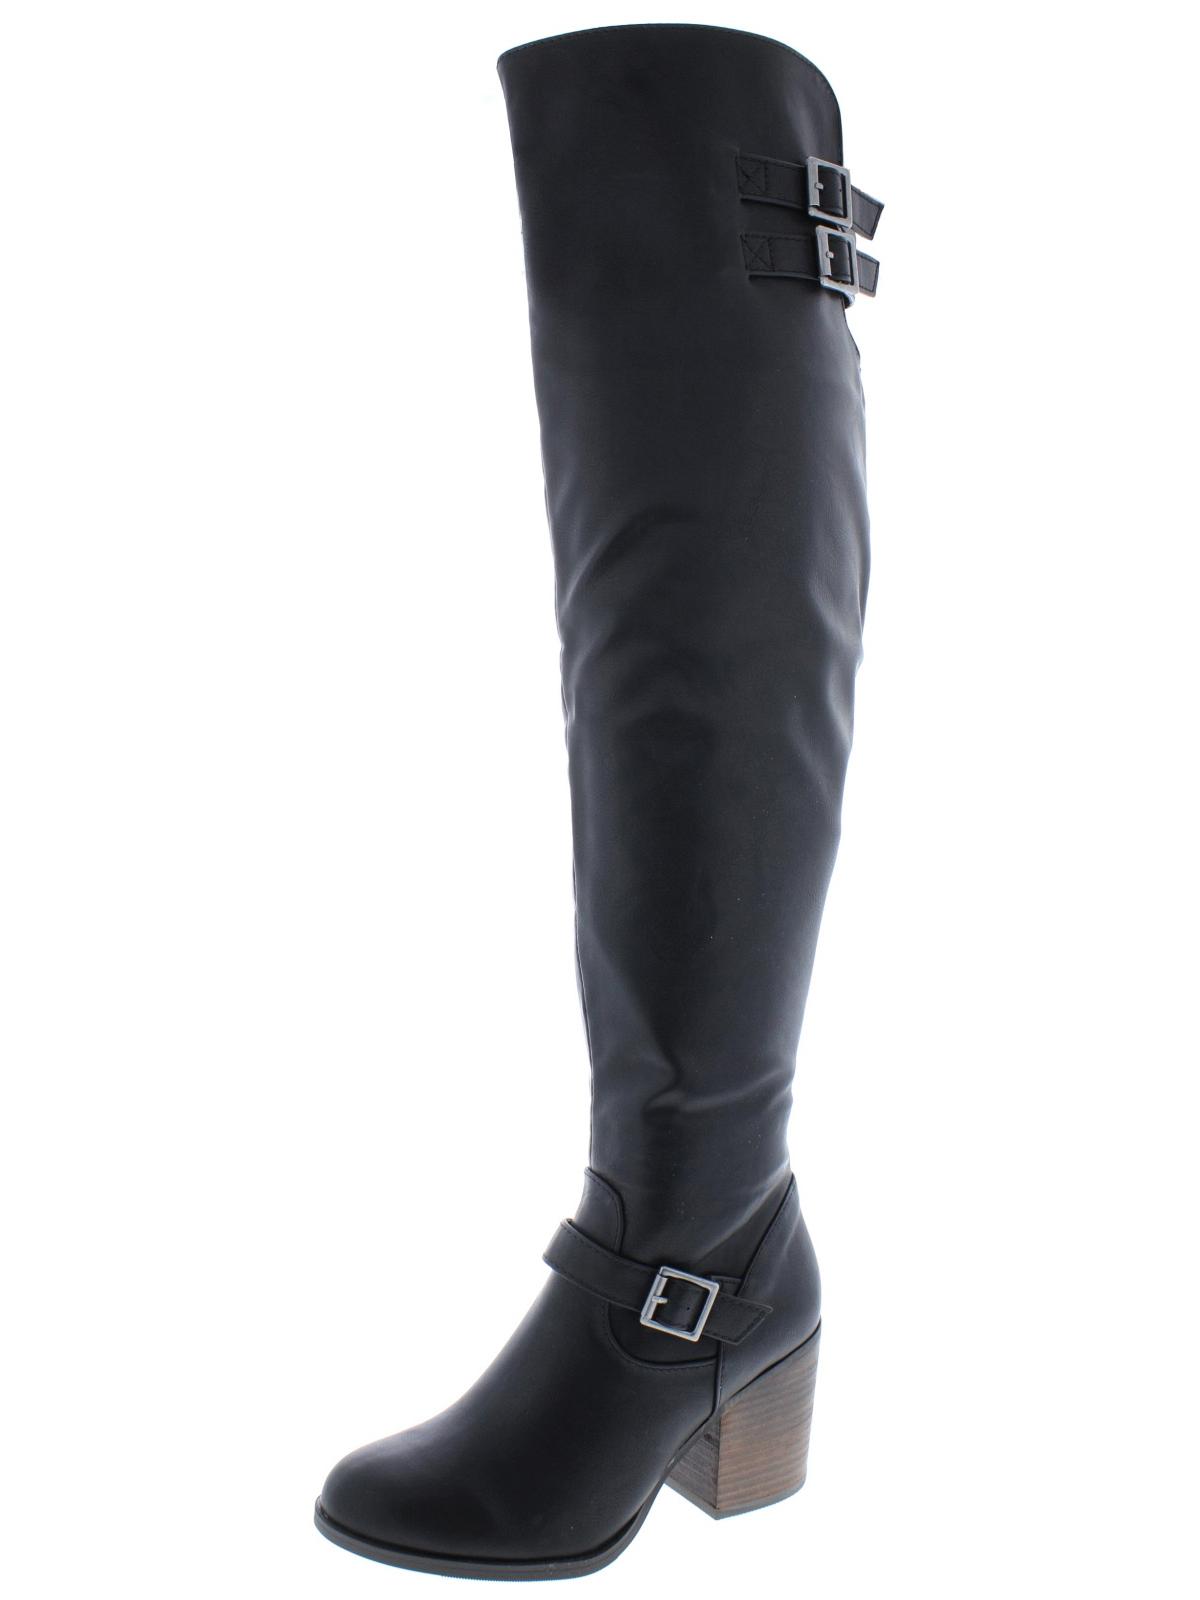 Material Girl Womens Odiana Faux Leather Riding Boots Black 5.5 Medium (B,M) - image 1 of 2